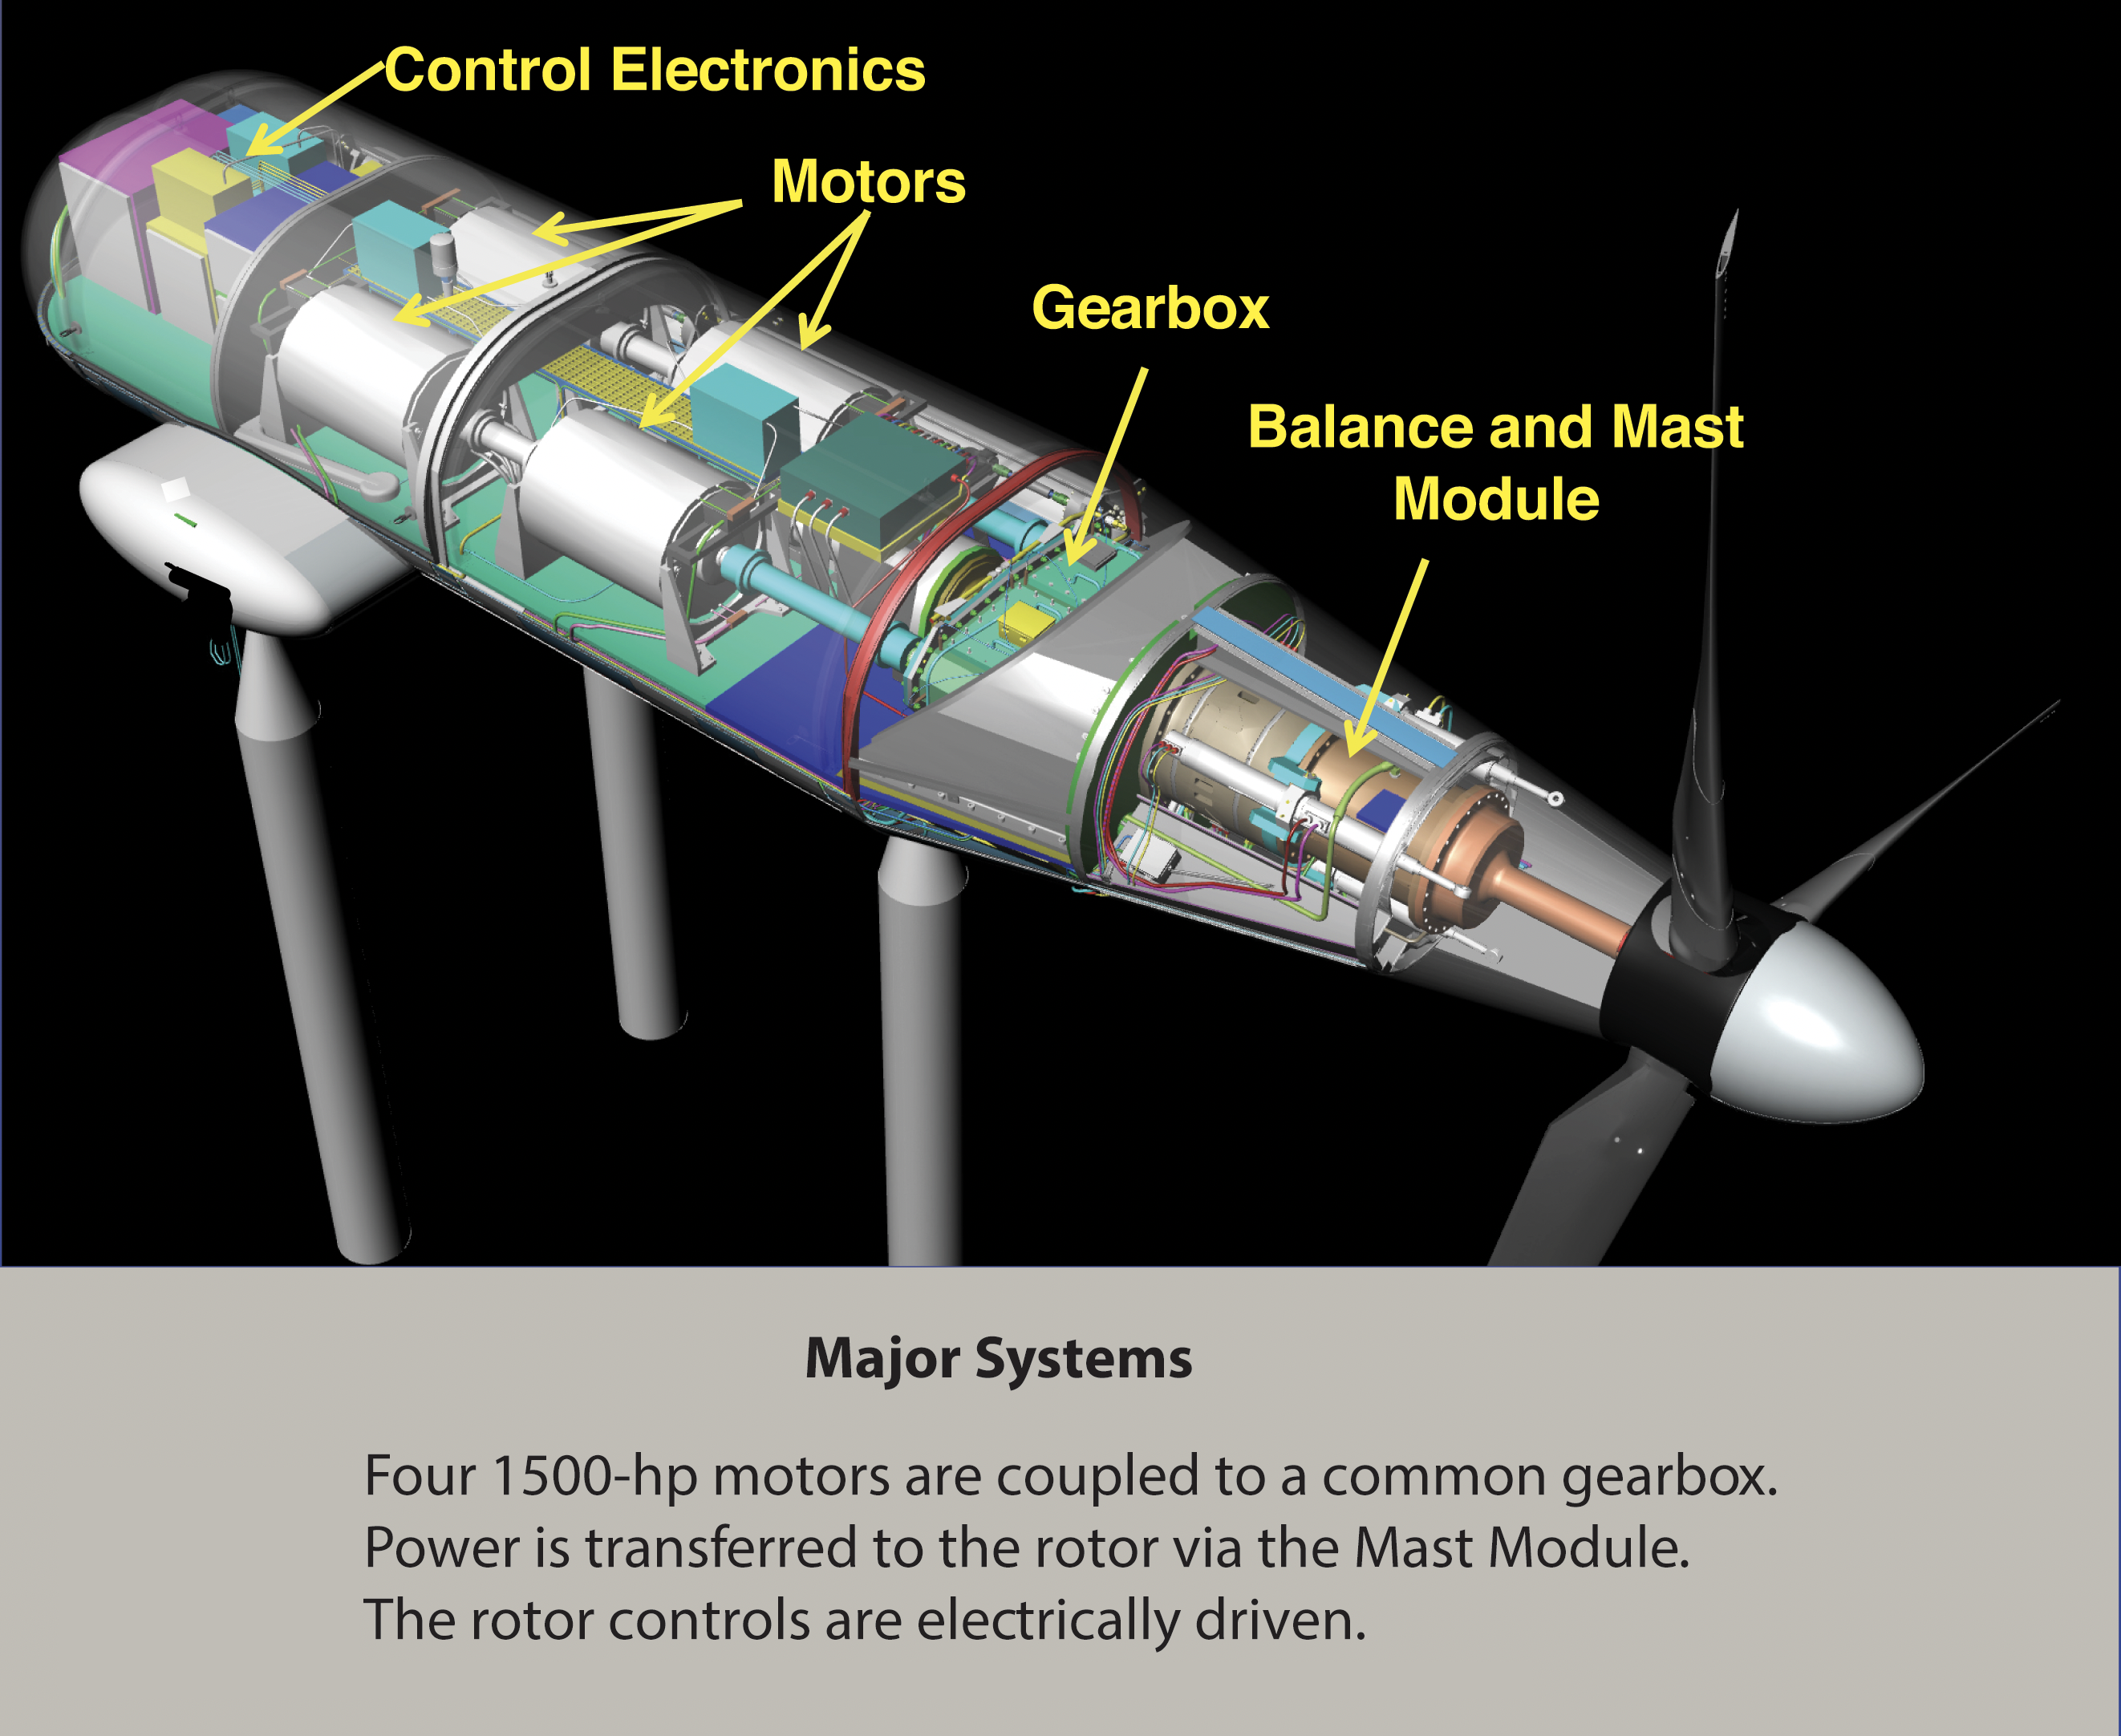 image of Major systems